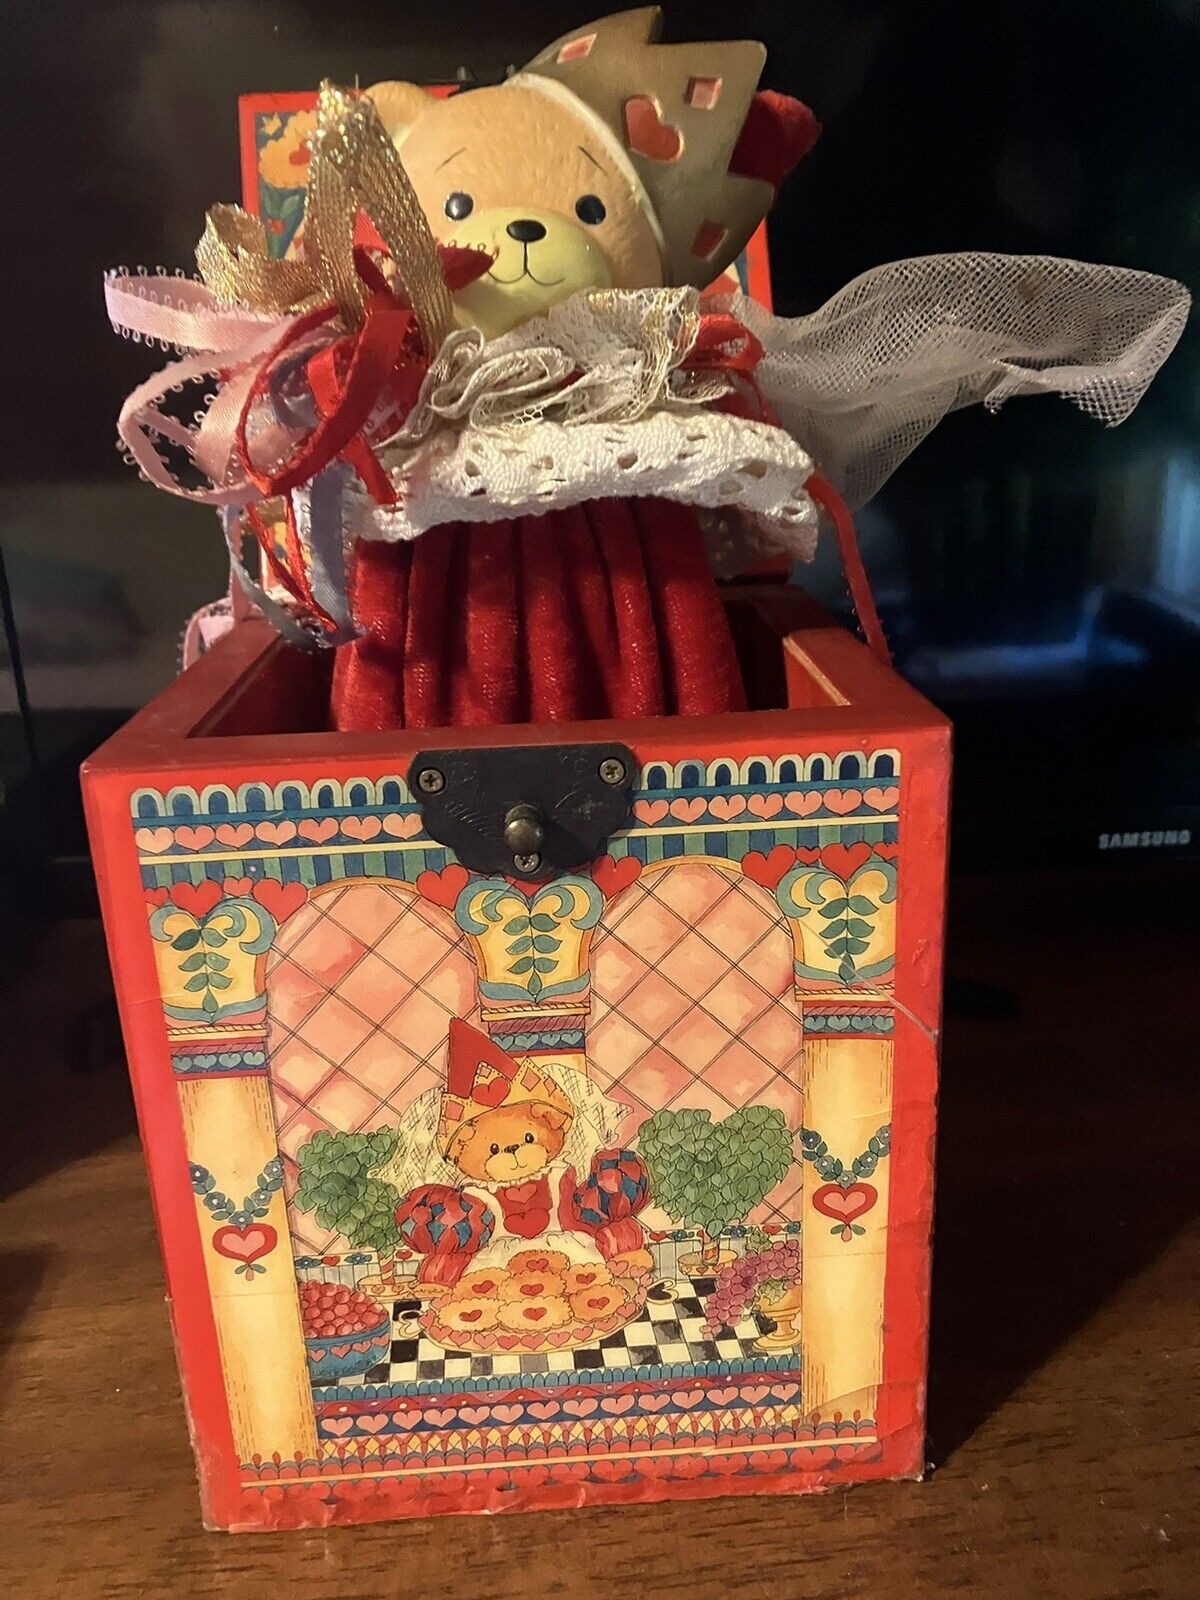 RARE 1987 Enesco “Queen Of Hearts” Jack In The Box Musical Lucy Rigg Teddy Bear 